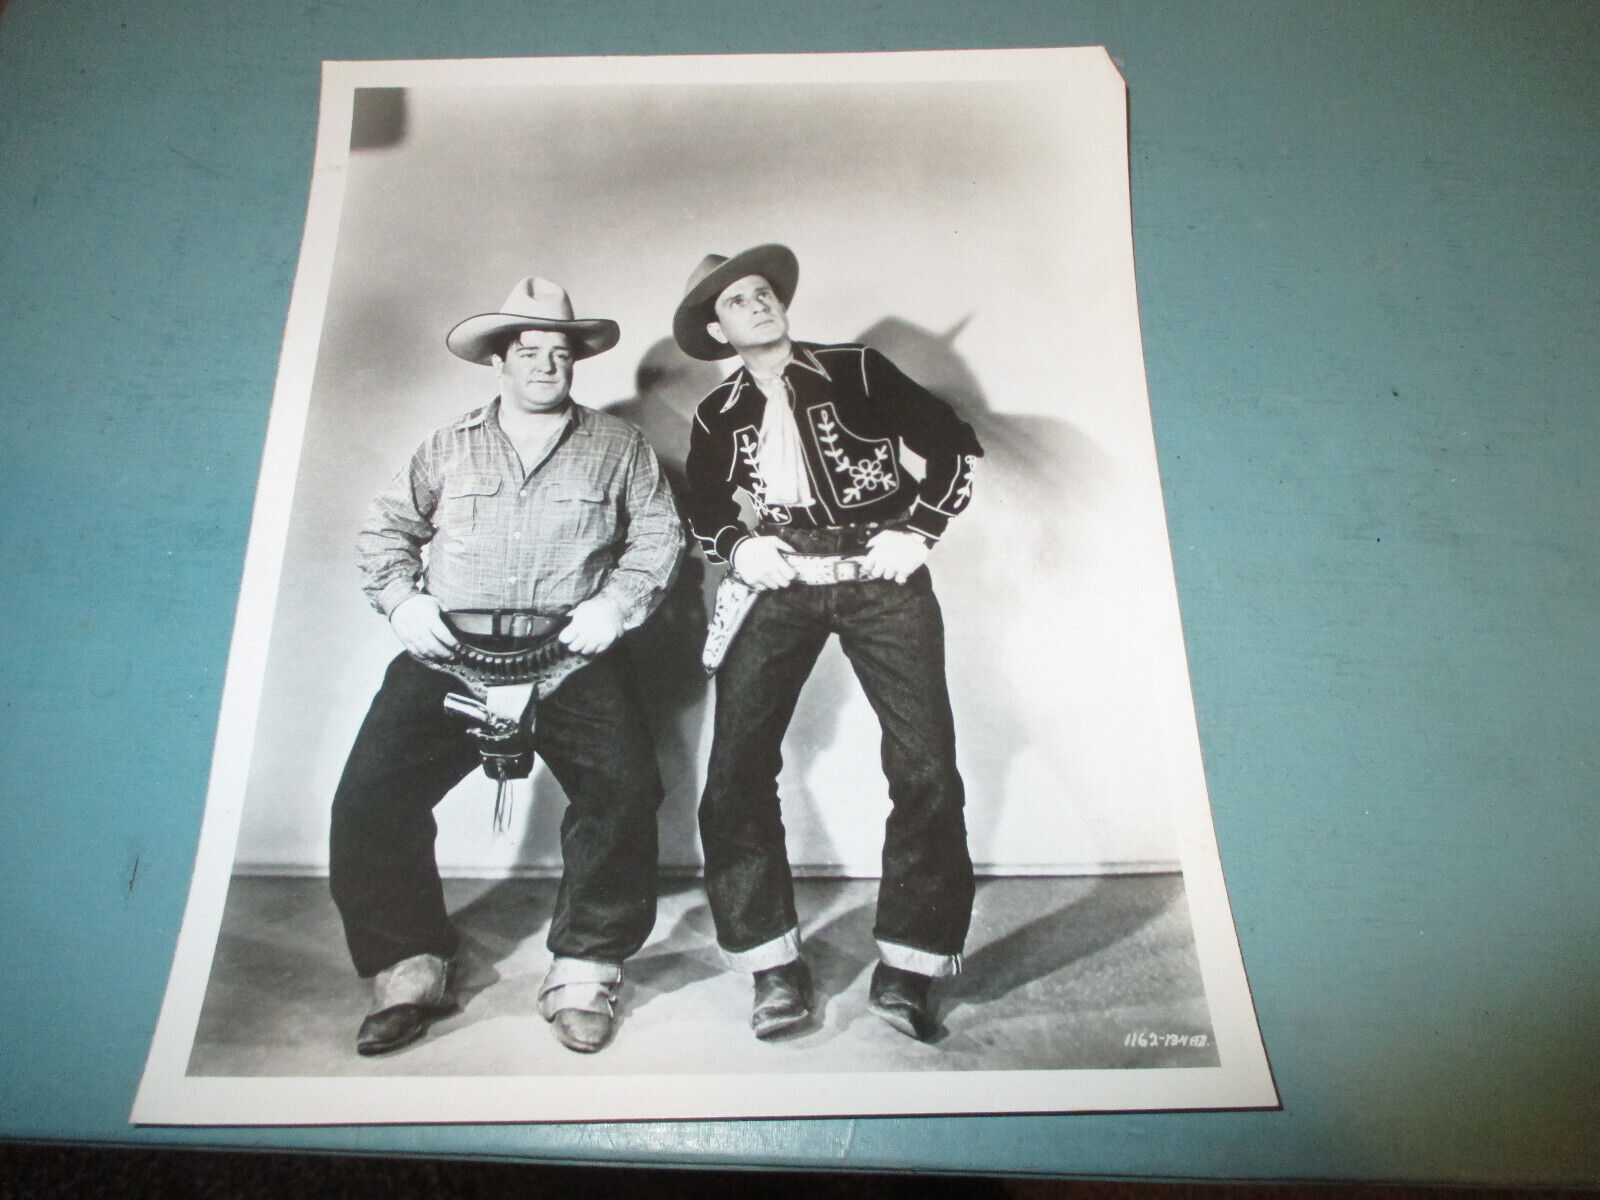 Abbot and Costello Portrait Photo 8 X 10 Glossy